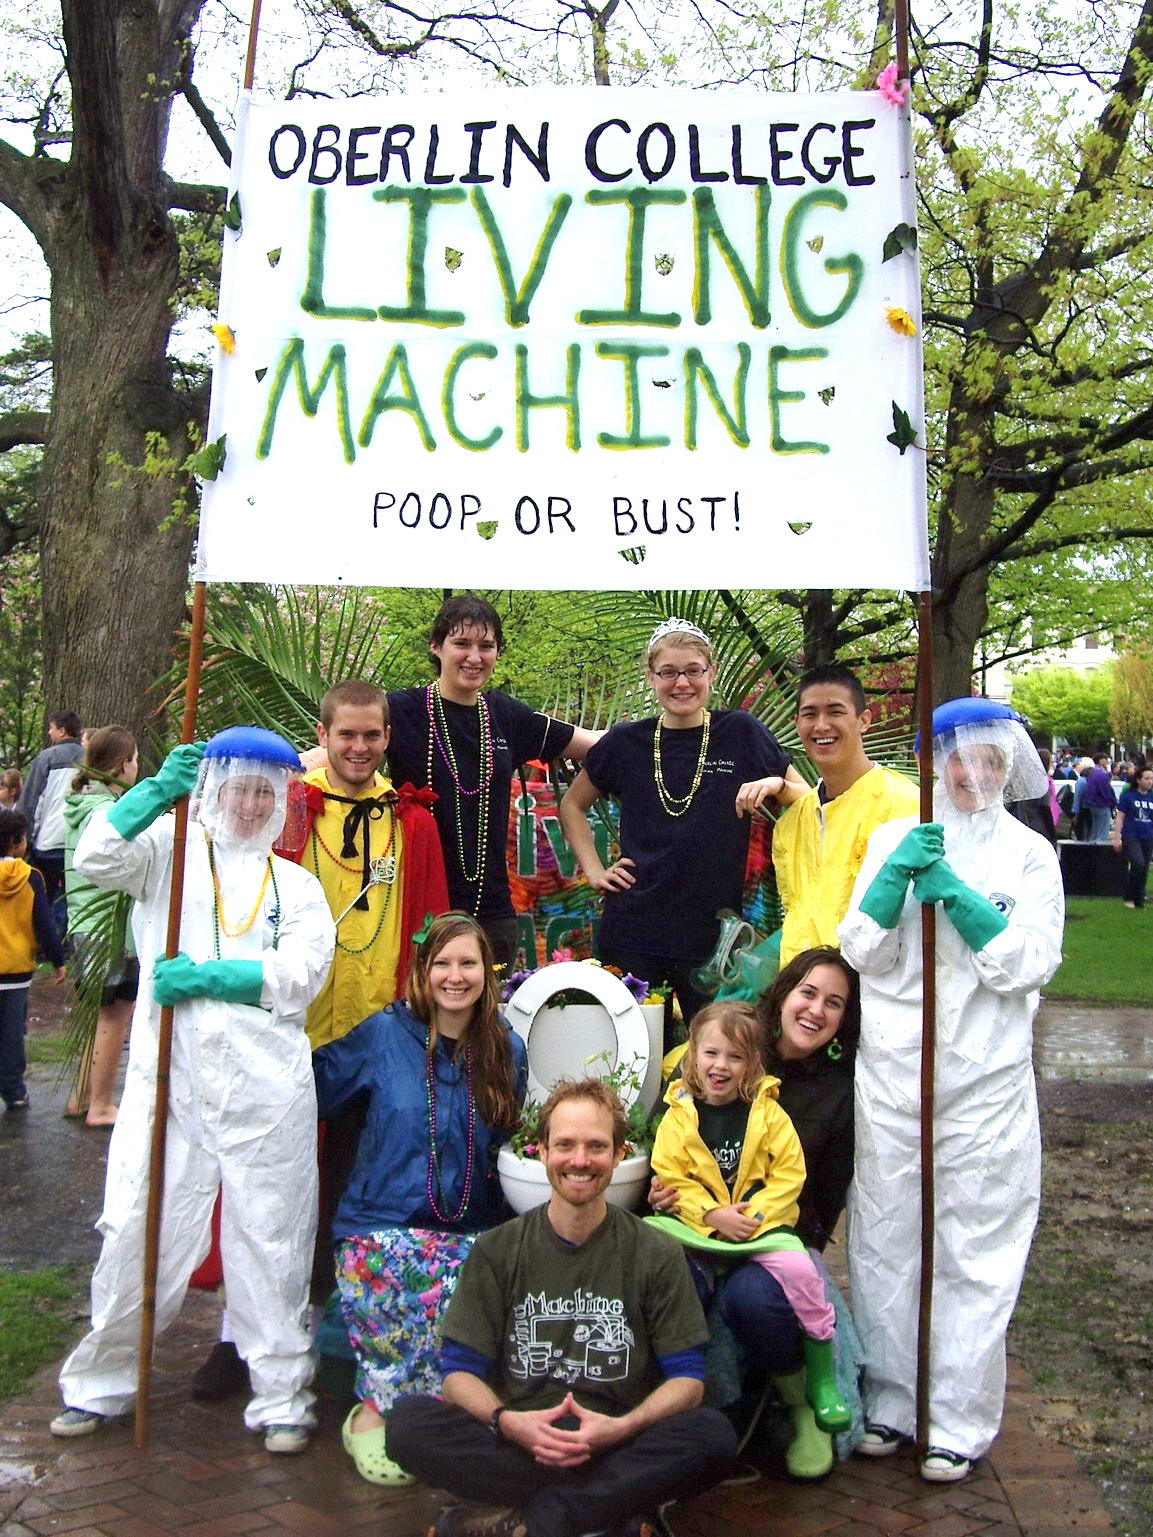 The Living Machine joins in the Big Parade festivities